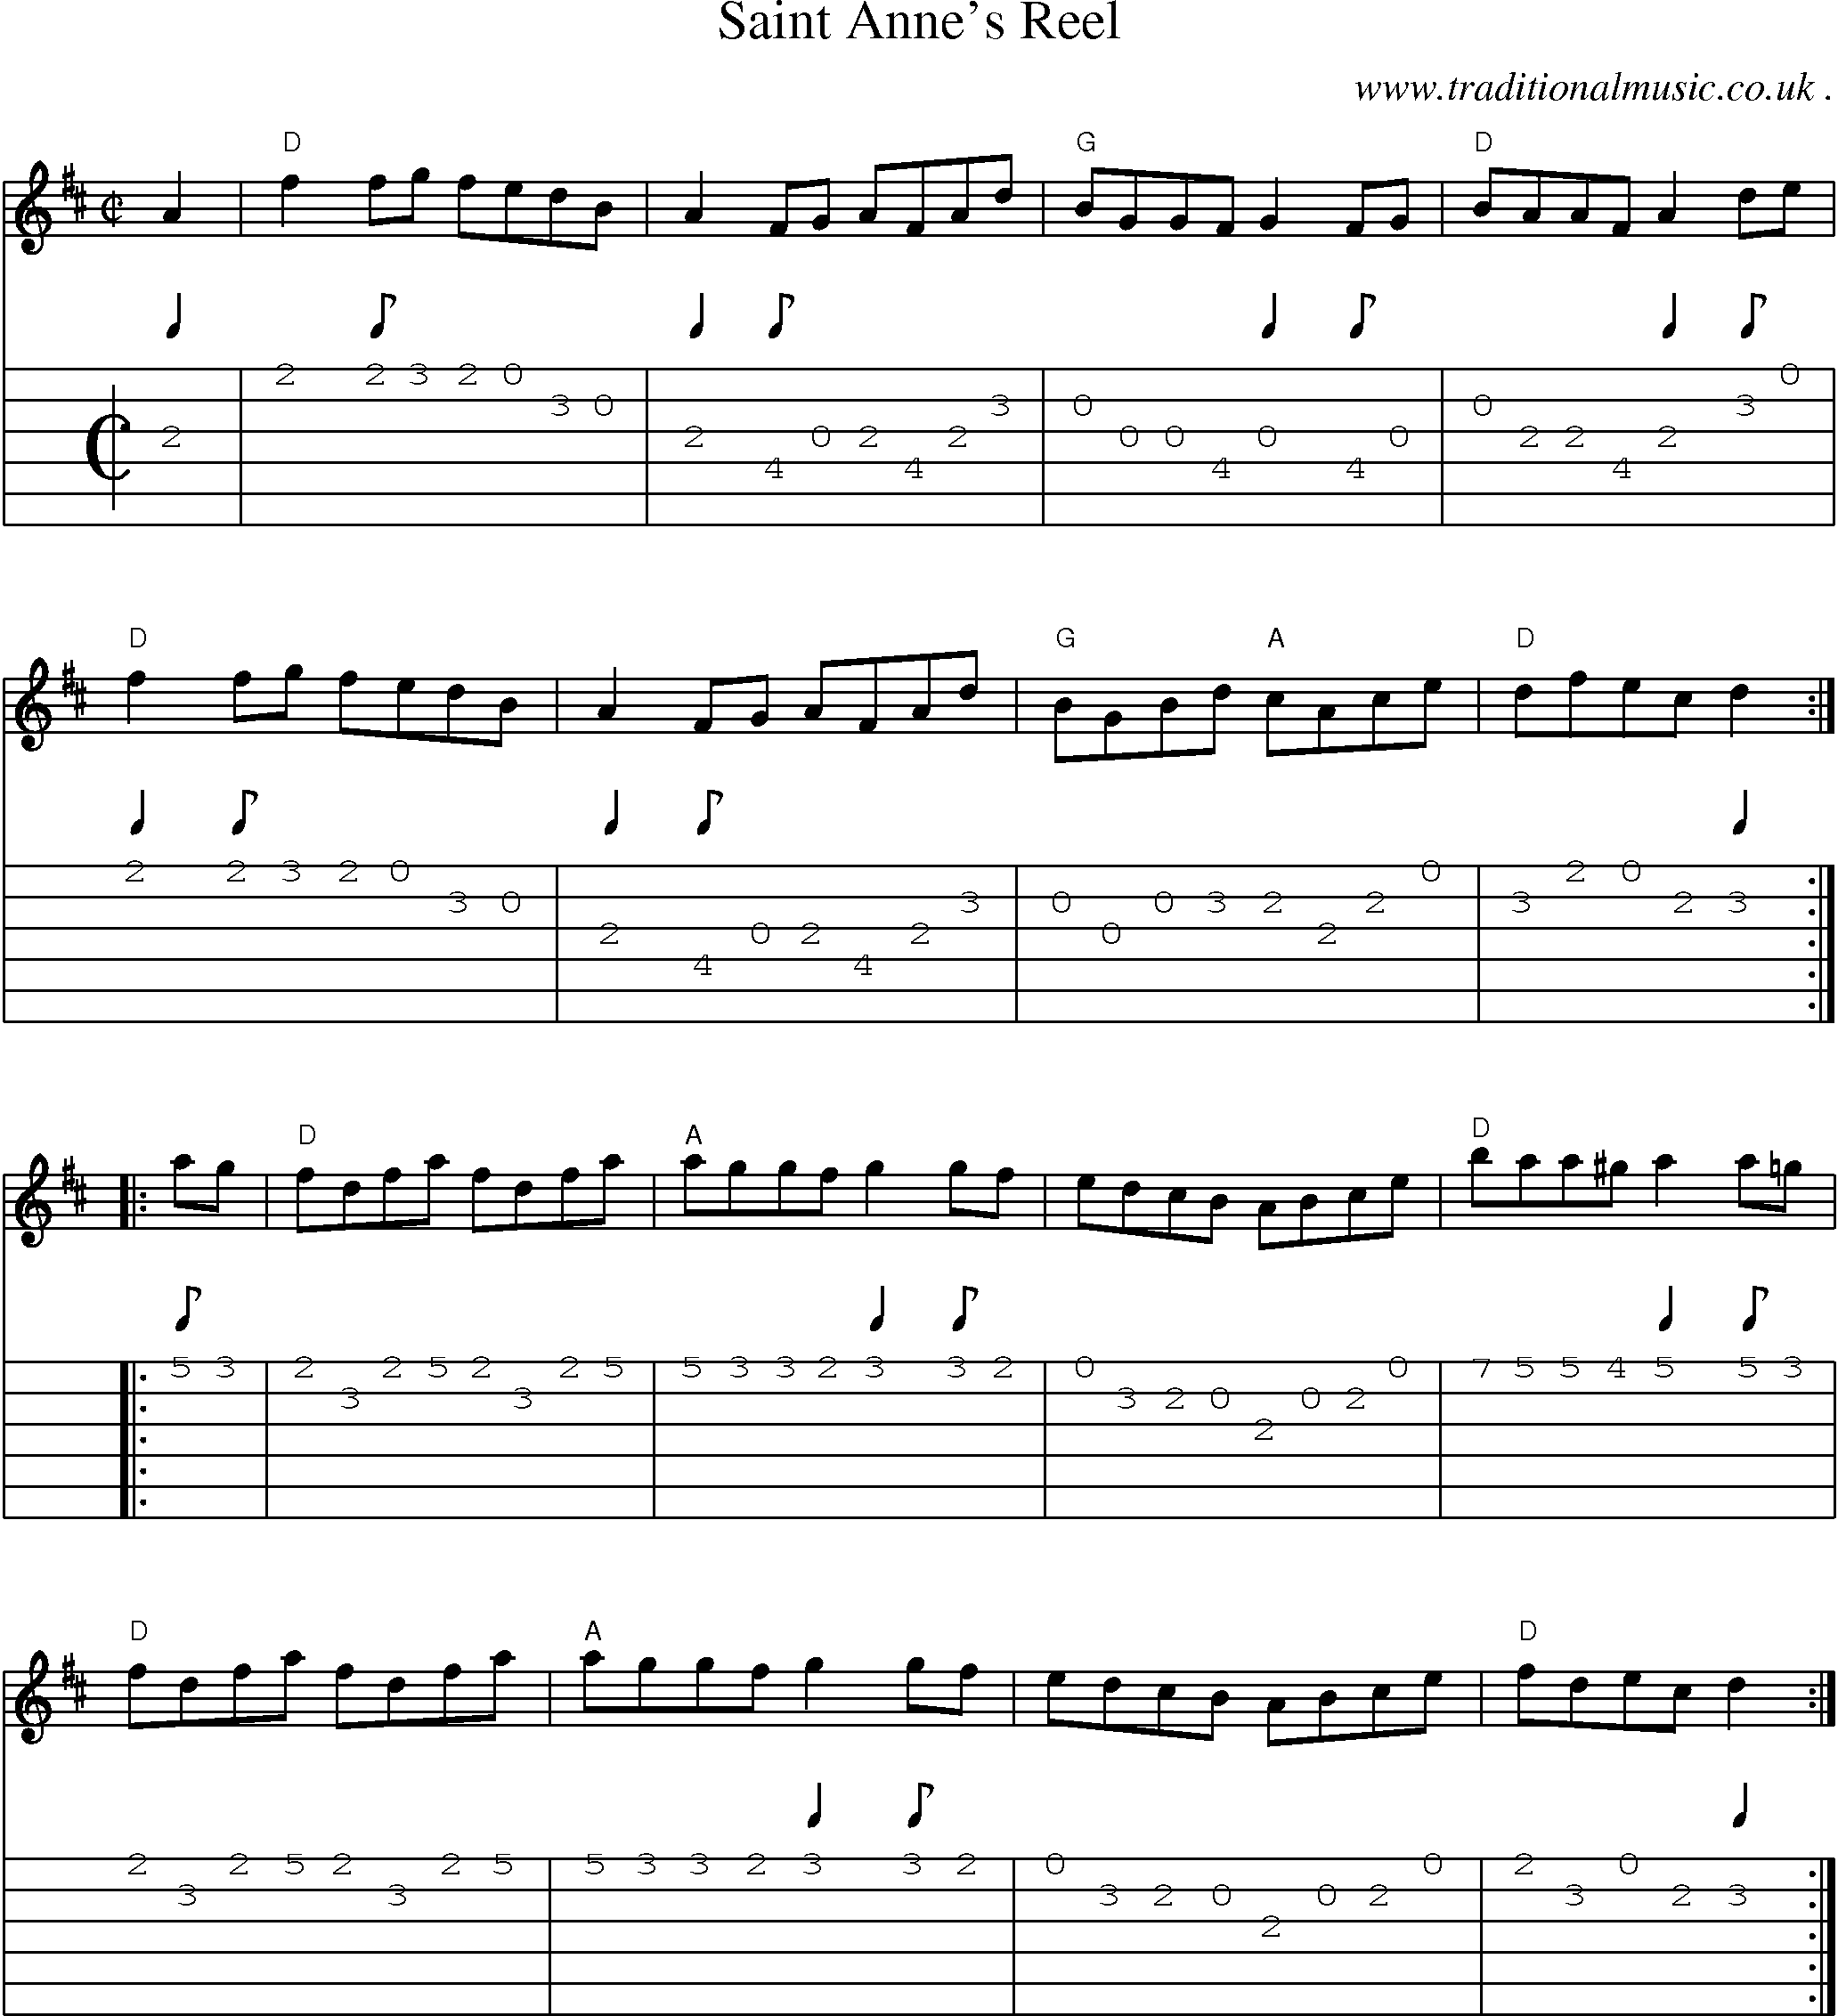 Music Score and Guitar Tabs for Saint Annes Reel